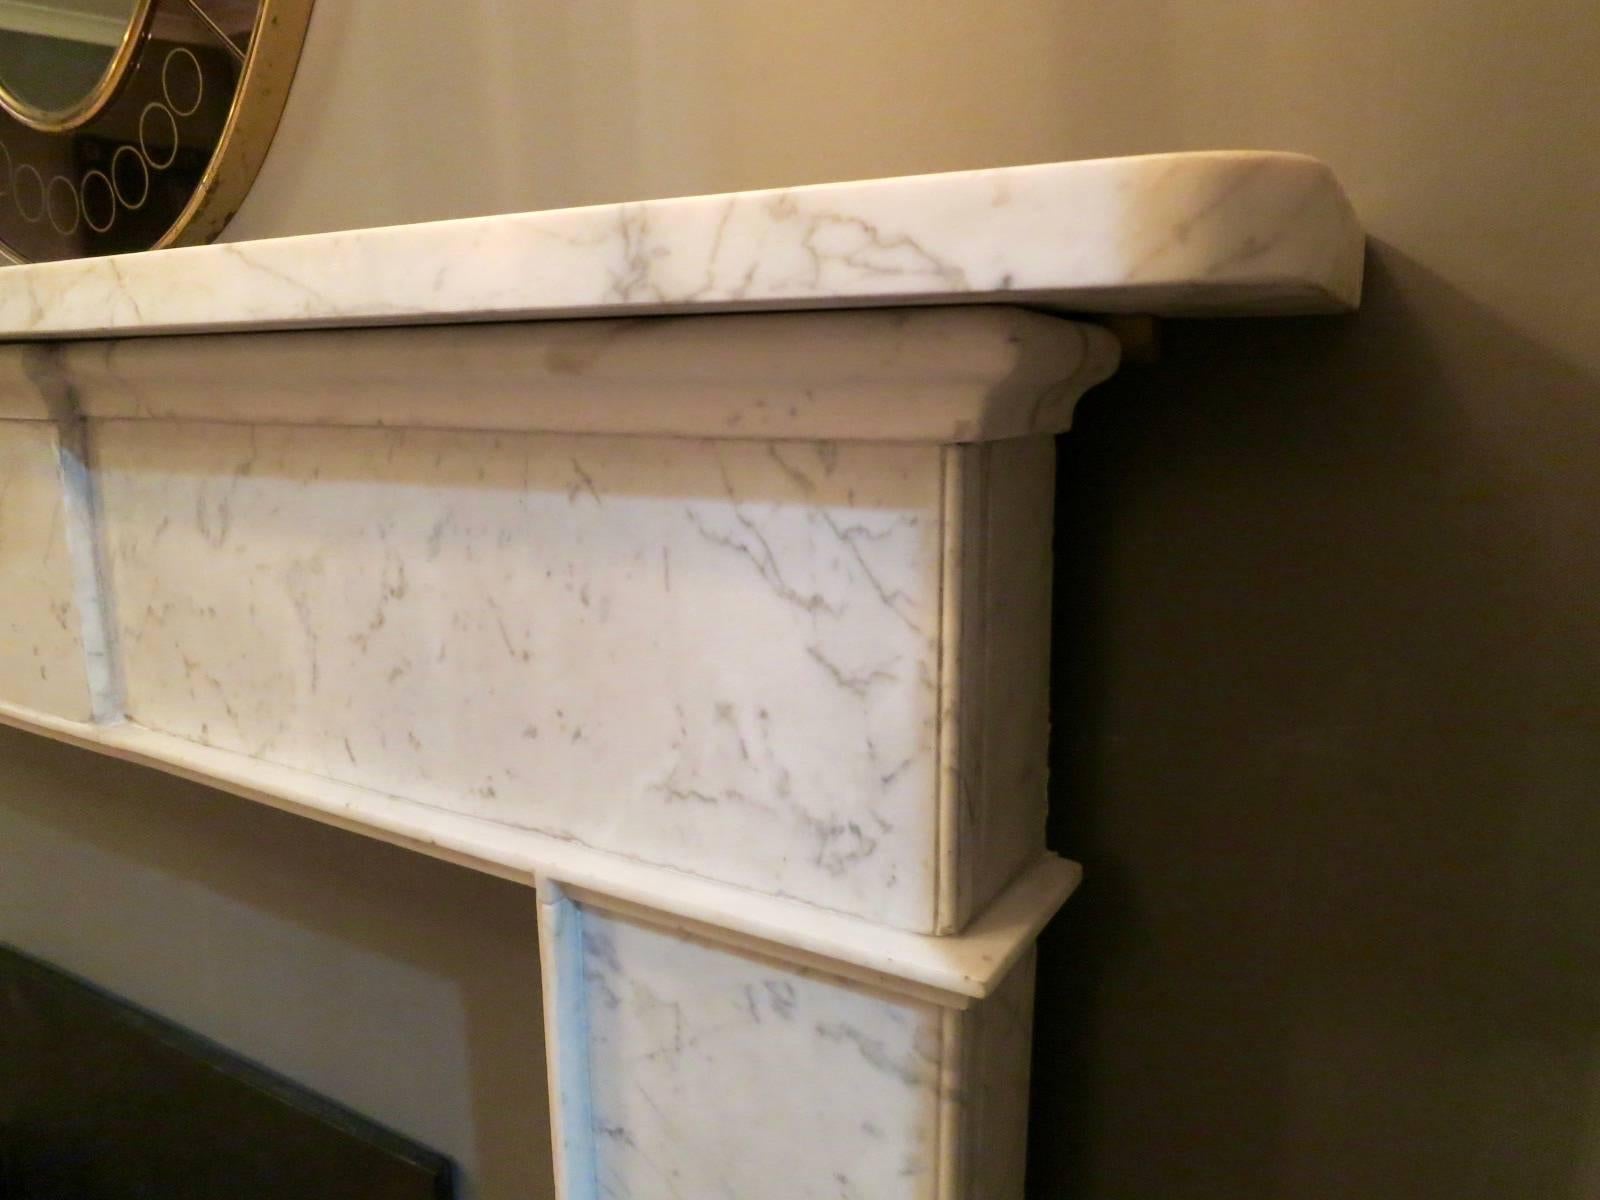 An architecturally designed George III surround in pencil vein Carrara and statuary white marbles. Supported on statuary foot blocks, with statuary in grounds, mouldings and bed moulding. The jambs, shelf and frieze in Carrara. A good example of an